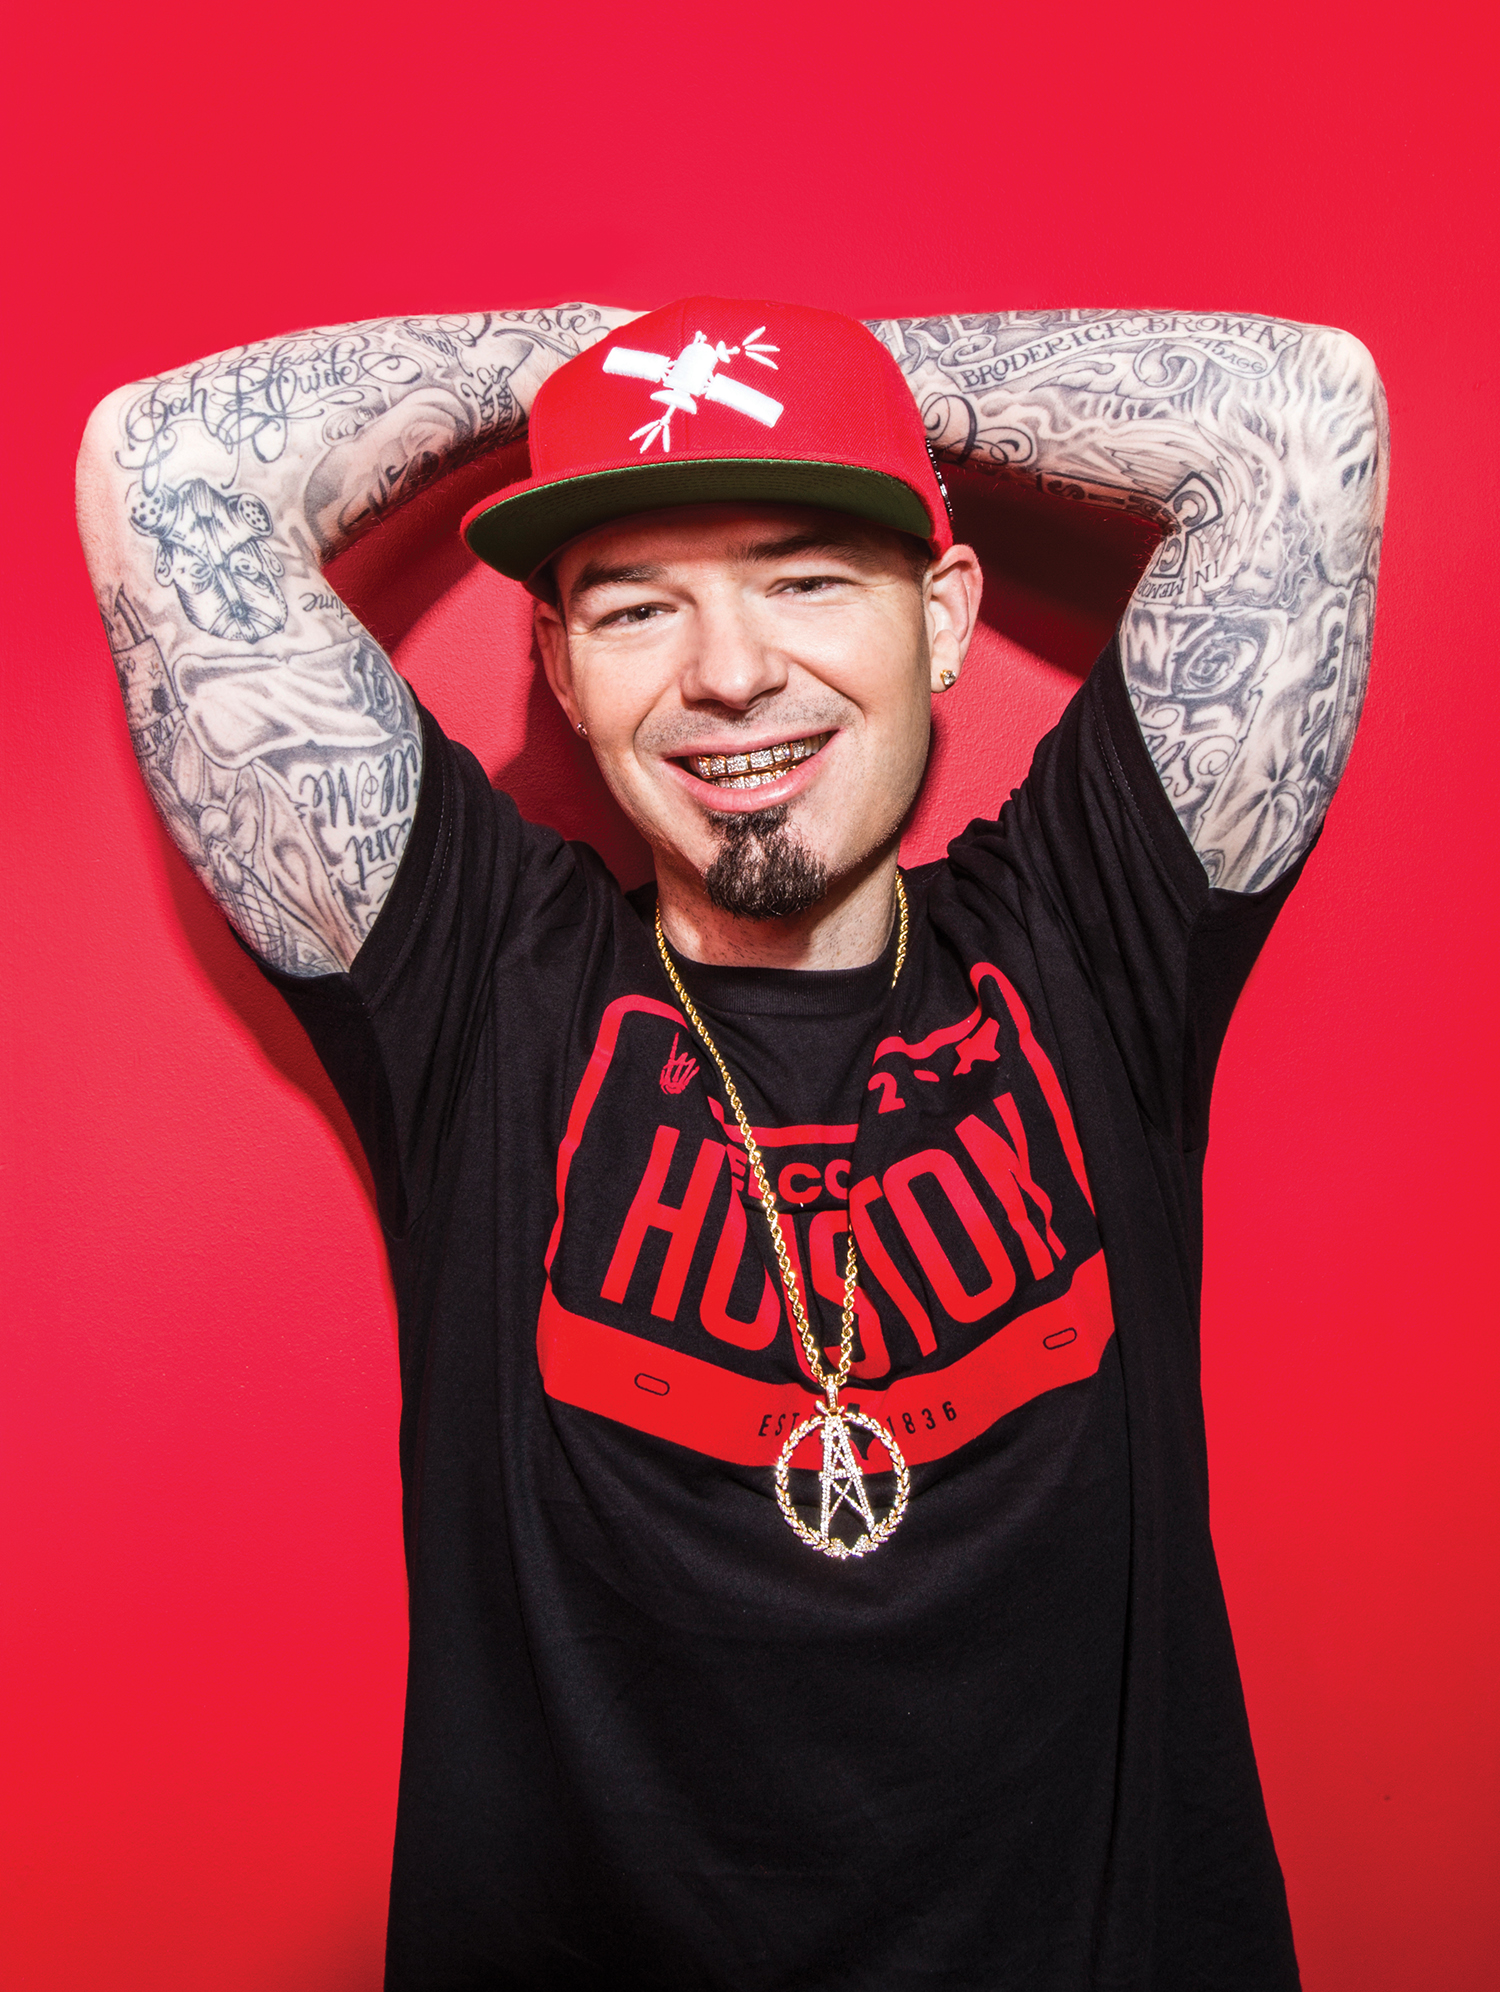 Texas hip-hop star Paul Wall to headline Pink party